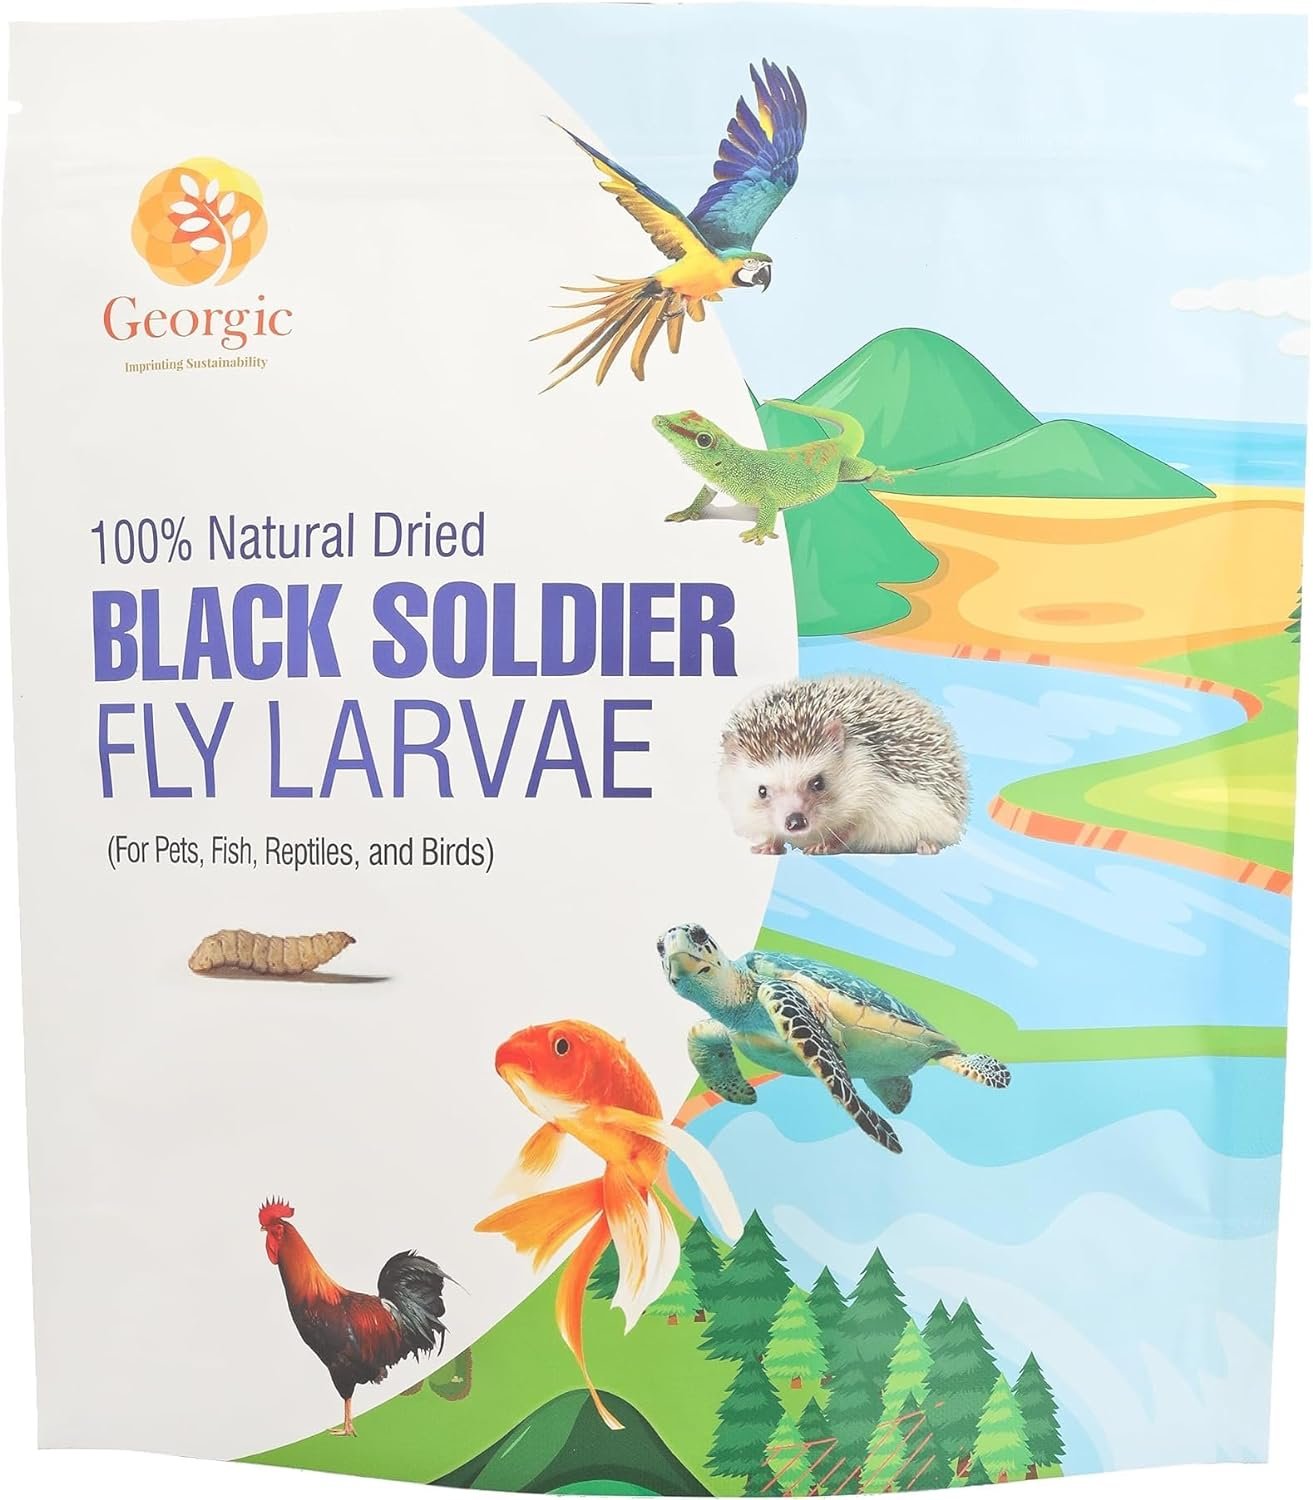 GEORGIC Premium Dried Black Soldier Fly Larvae for Pets, Fish, Reptiles and Birds - High Protein Chicken Feed, Bird Food with Calcium More Than Mealworms - 1.5 lb